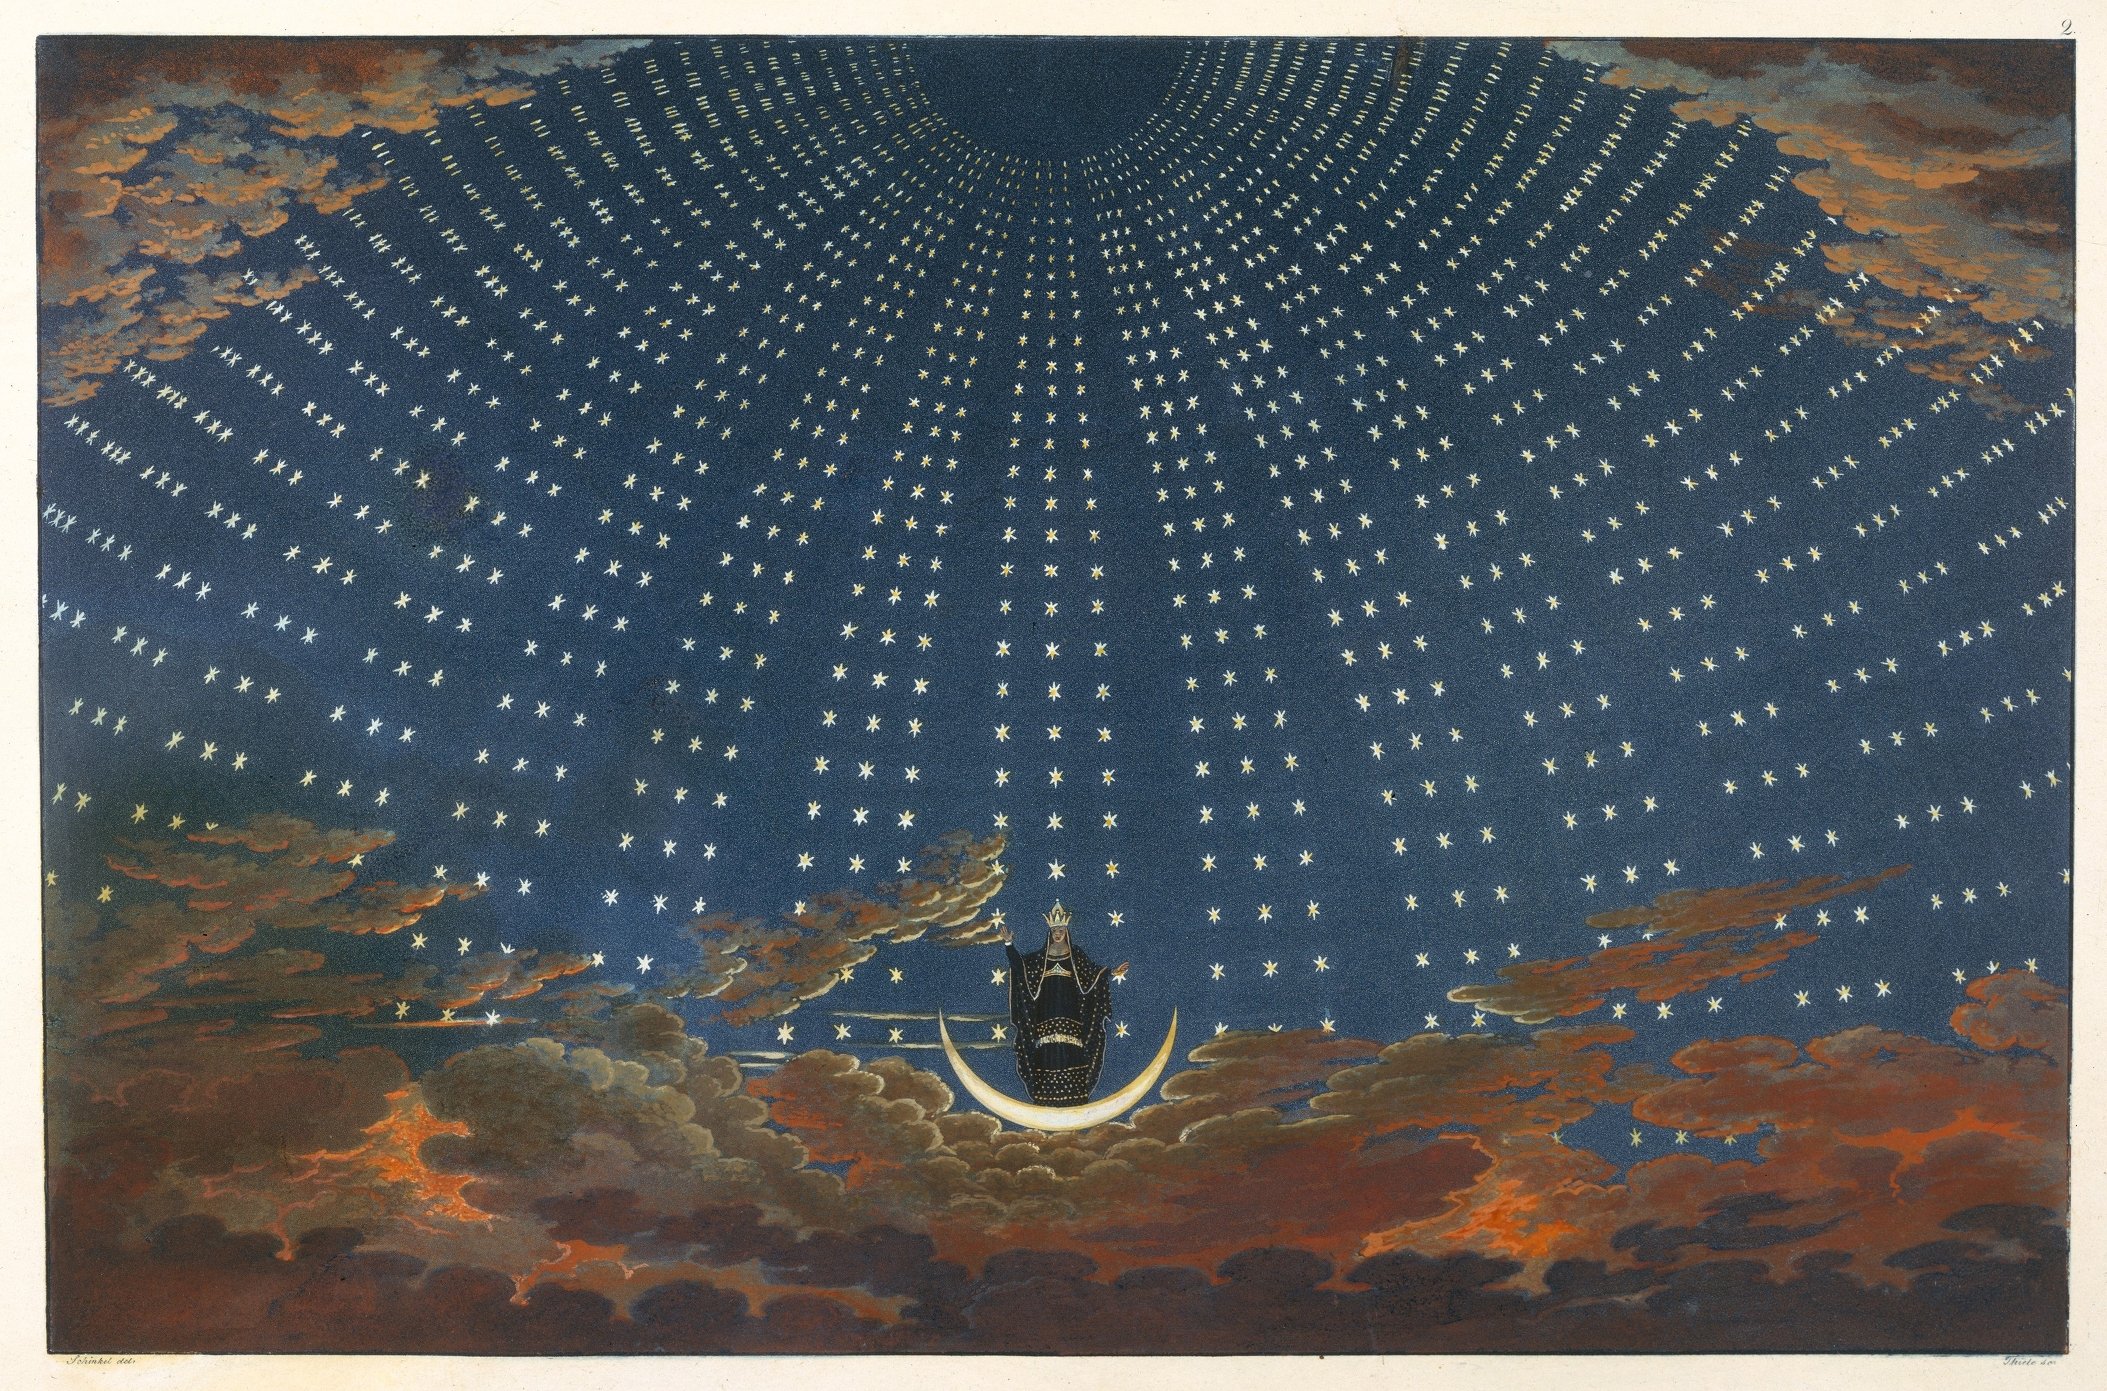 Design for The Magic Flute; The Hall of Stars in the Palace of the Queen of the Night, Act 1, Scene 6 (1847–49)